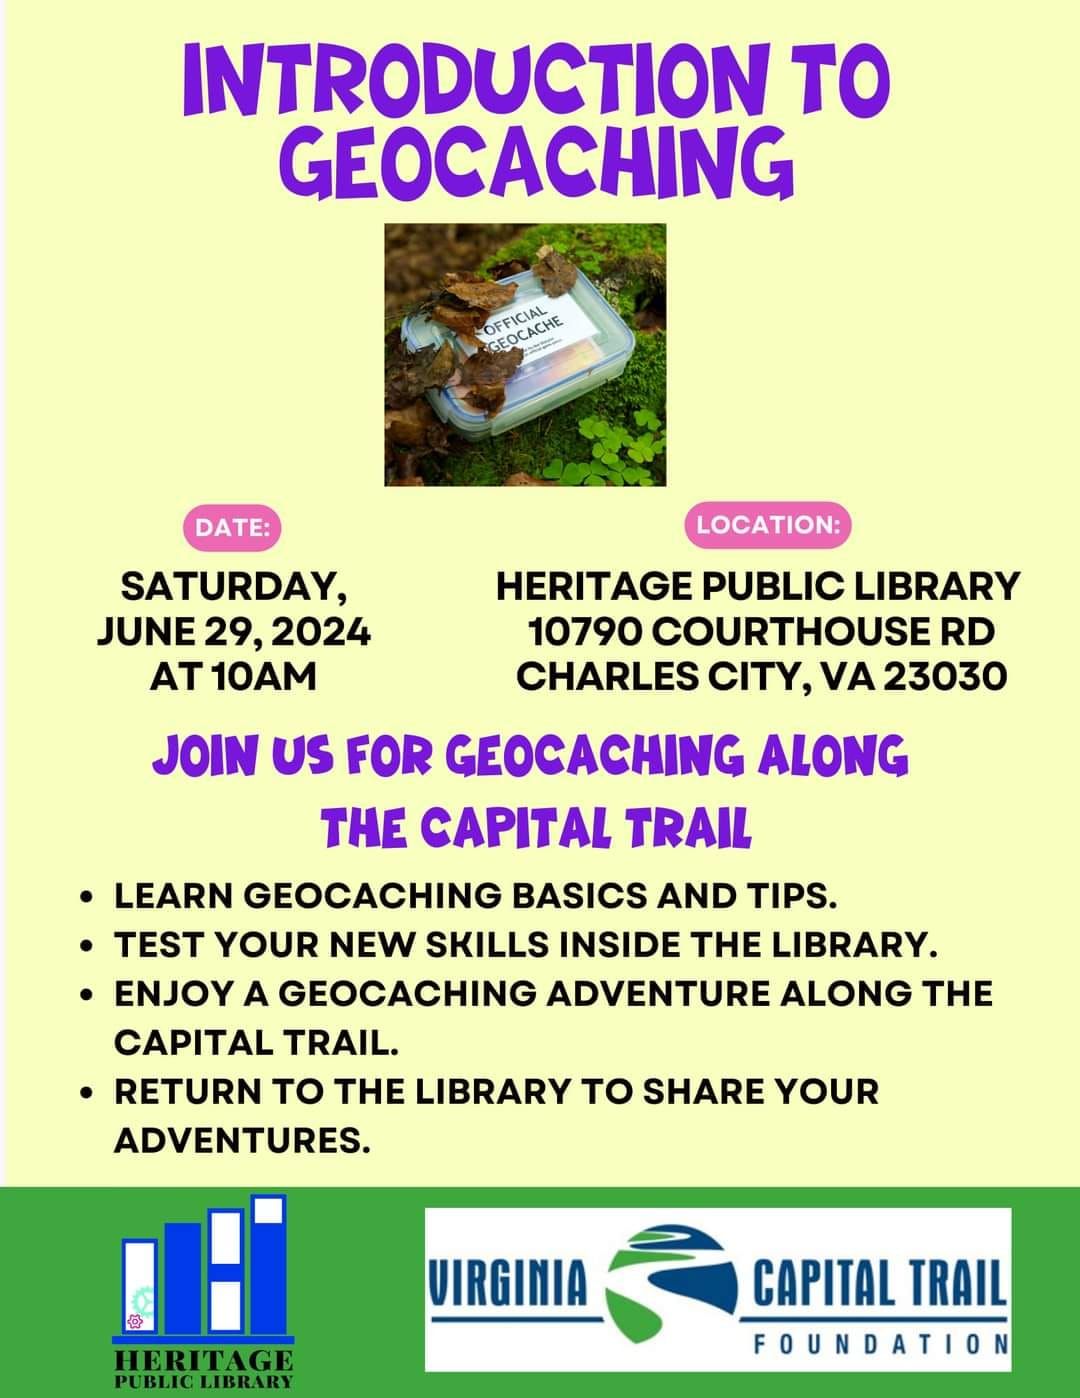 Introduction to Geocaching!